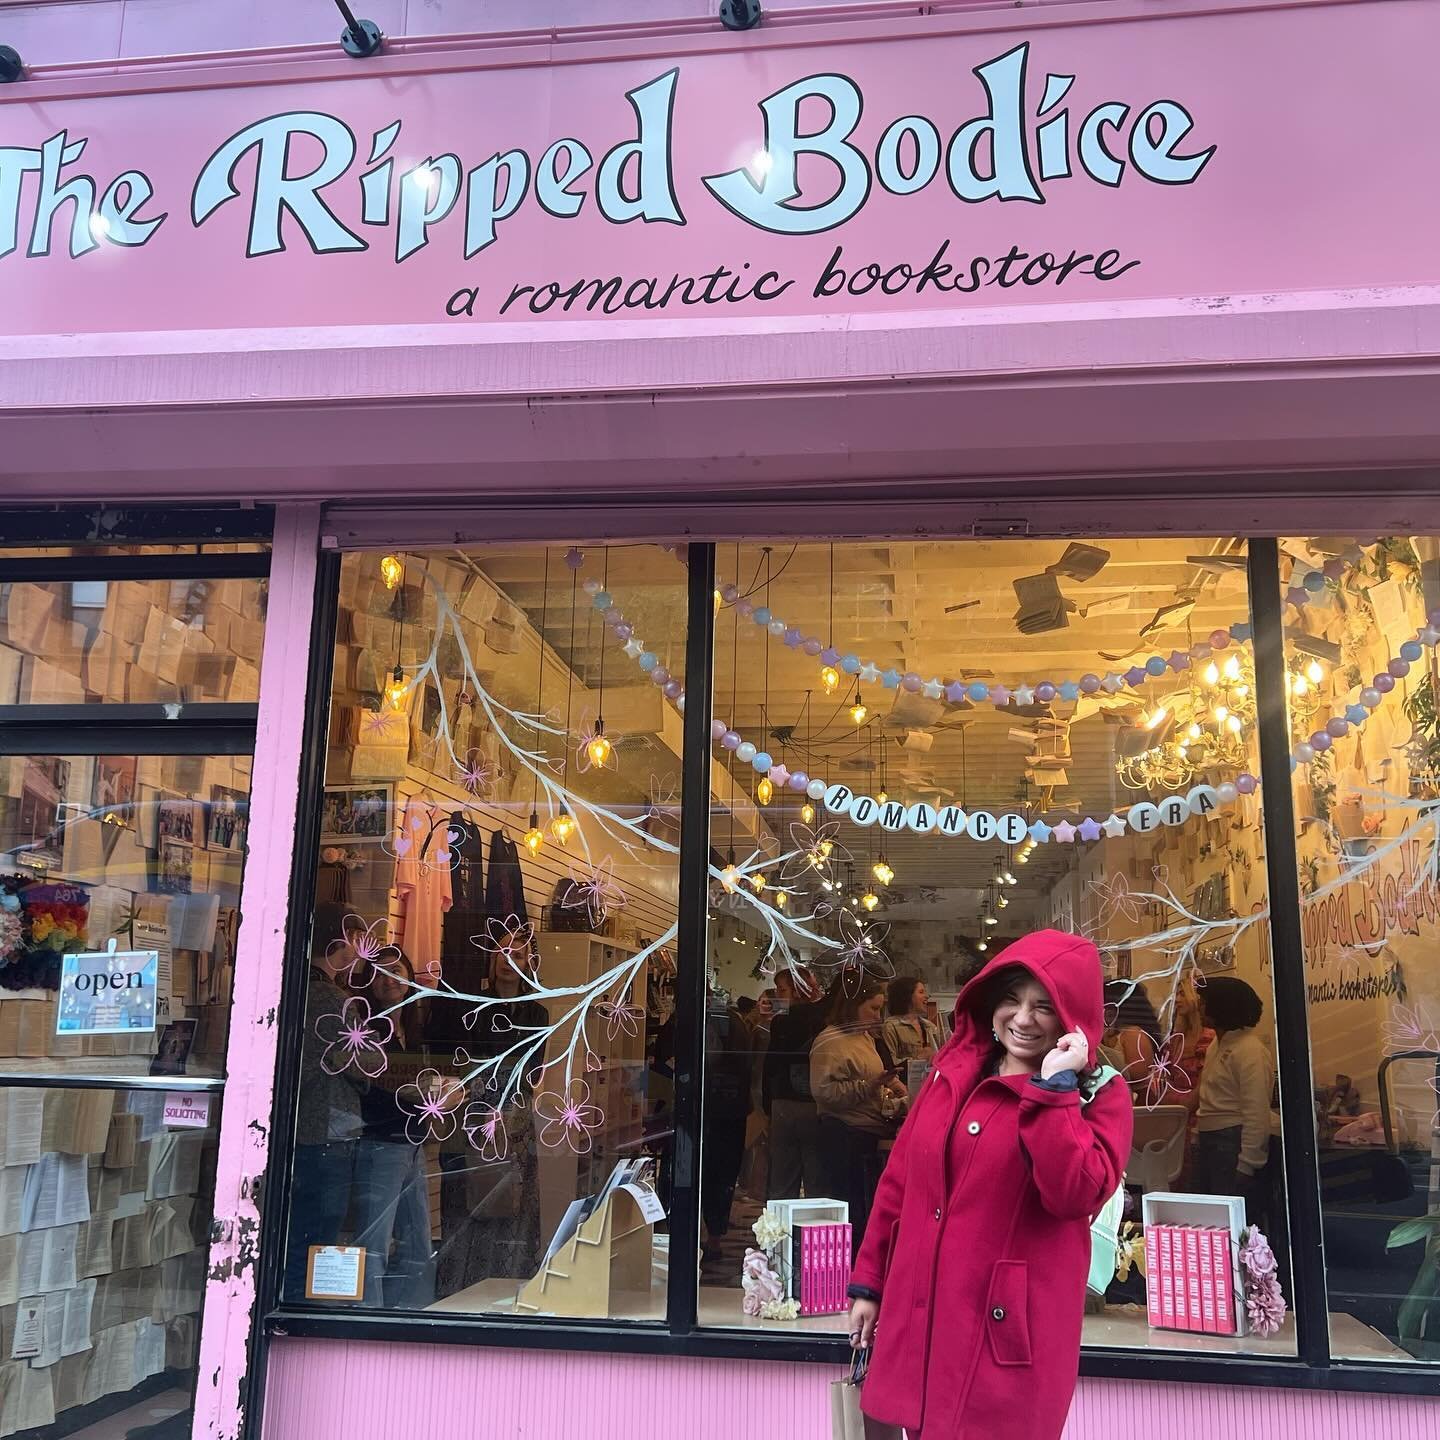 I told myself &ldquo;the next time I&rsquo;m in New York I have to see @therippedbodice Brooklyn location&rdquo;. It was such a treat to visit on a random gloomy Saturday in April. One of my favorite bookstores by far.

Shout out to @megan_daniels fo